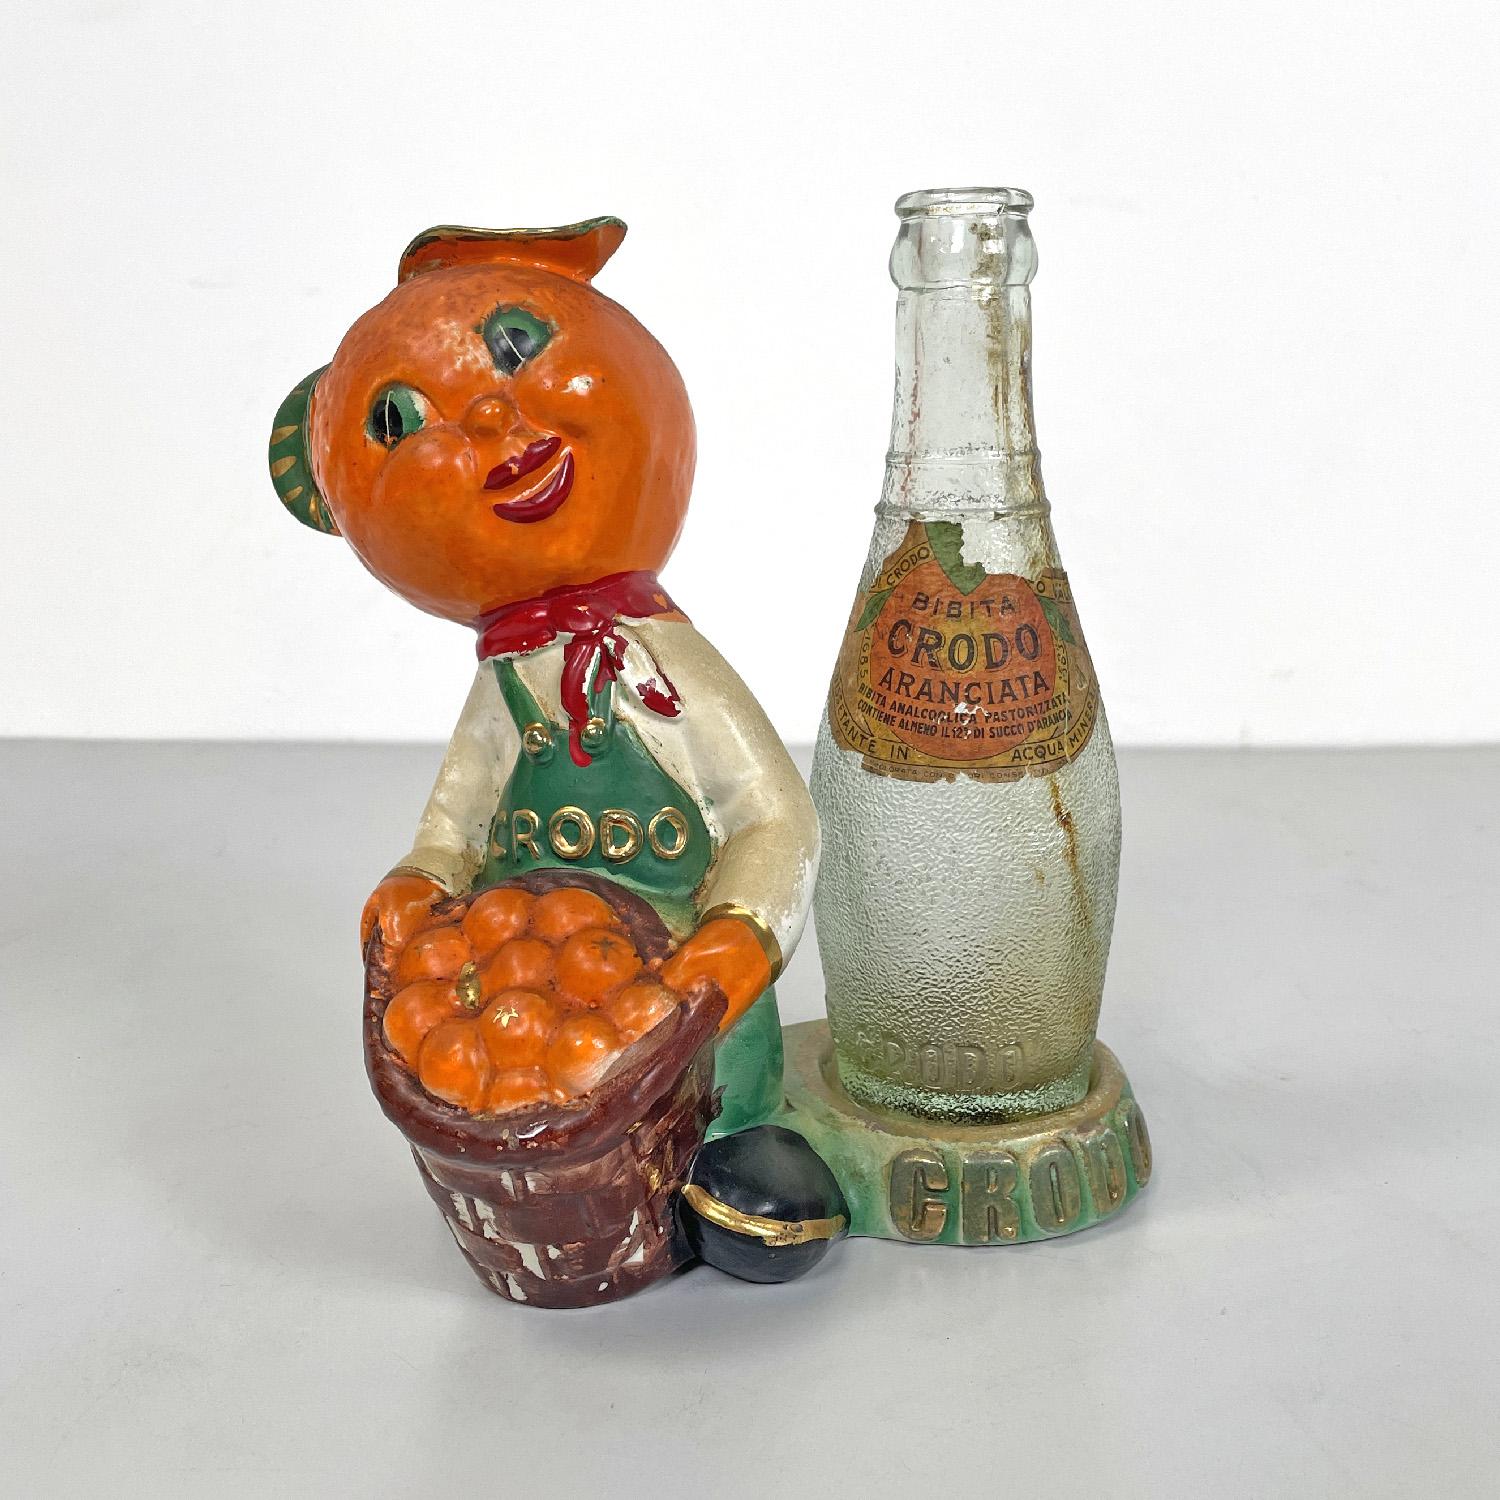 Italian mid-century modern Crodo advertising sculpture with glass bottle, 1960s
Advertising sculpture in glazed ceramic. The character is the brand's mascot, it has a mandarin for a head and carries a basket full of mandarins, which are the main